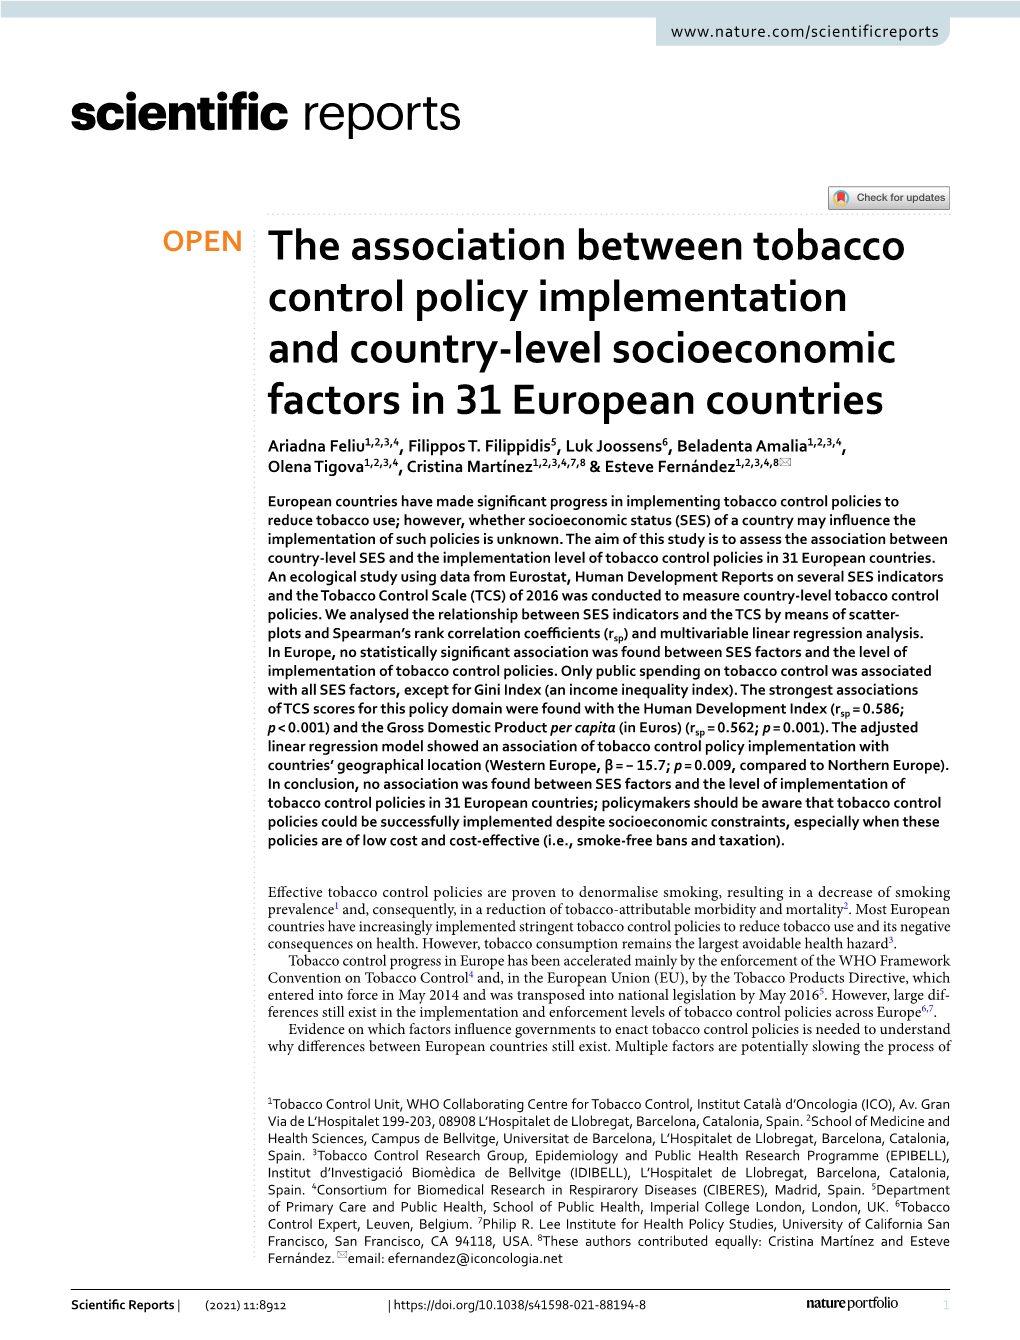 The Association Between Tobacco Control Policy Implementation and Country‑Level Socioeconomic Factors in 31 European Countries Ariadna Feliu1,2,3,4, Filippos T